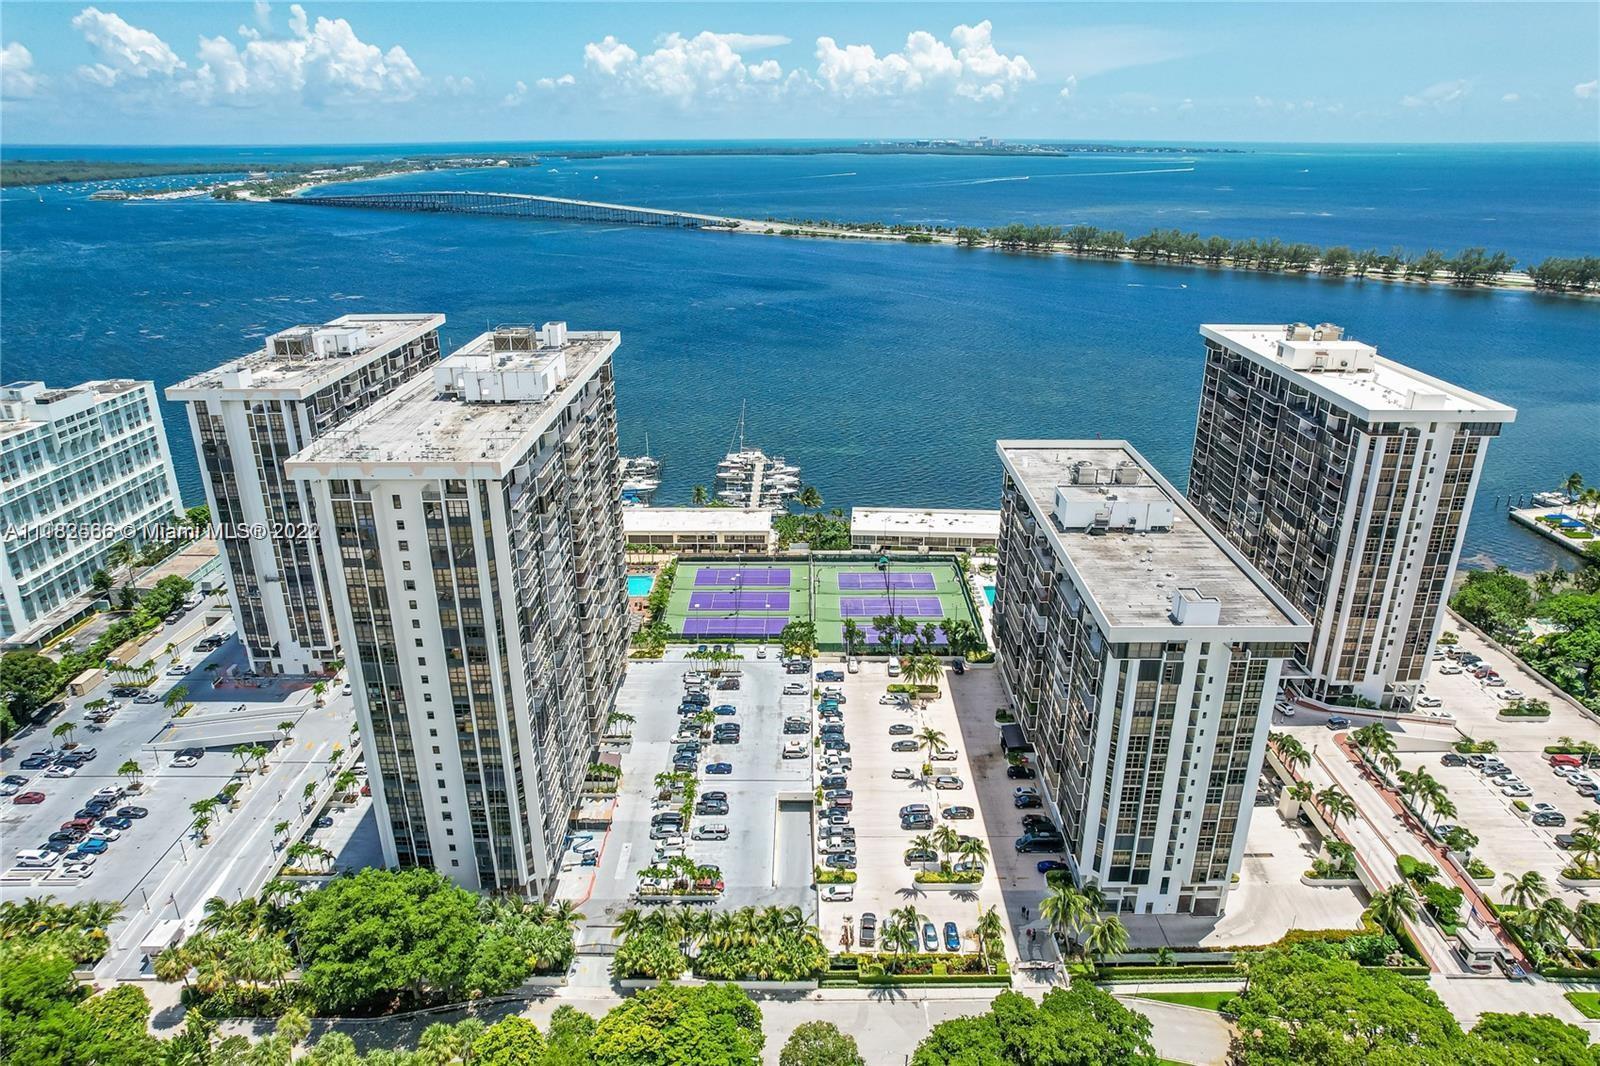 Great opportunity to own at Bayfront Brickell Place with marina, pool, tennis courts, fitness center